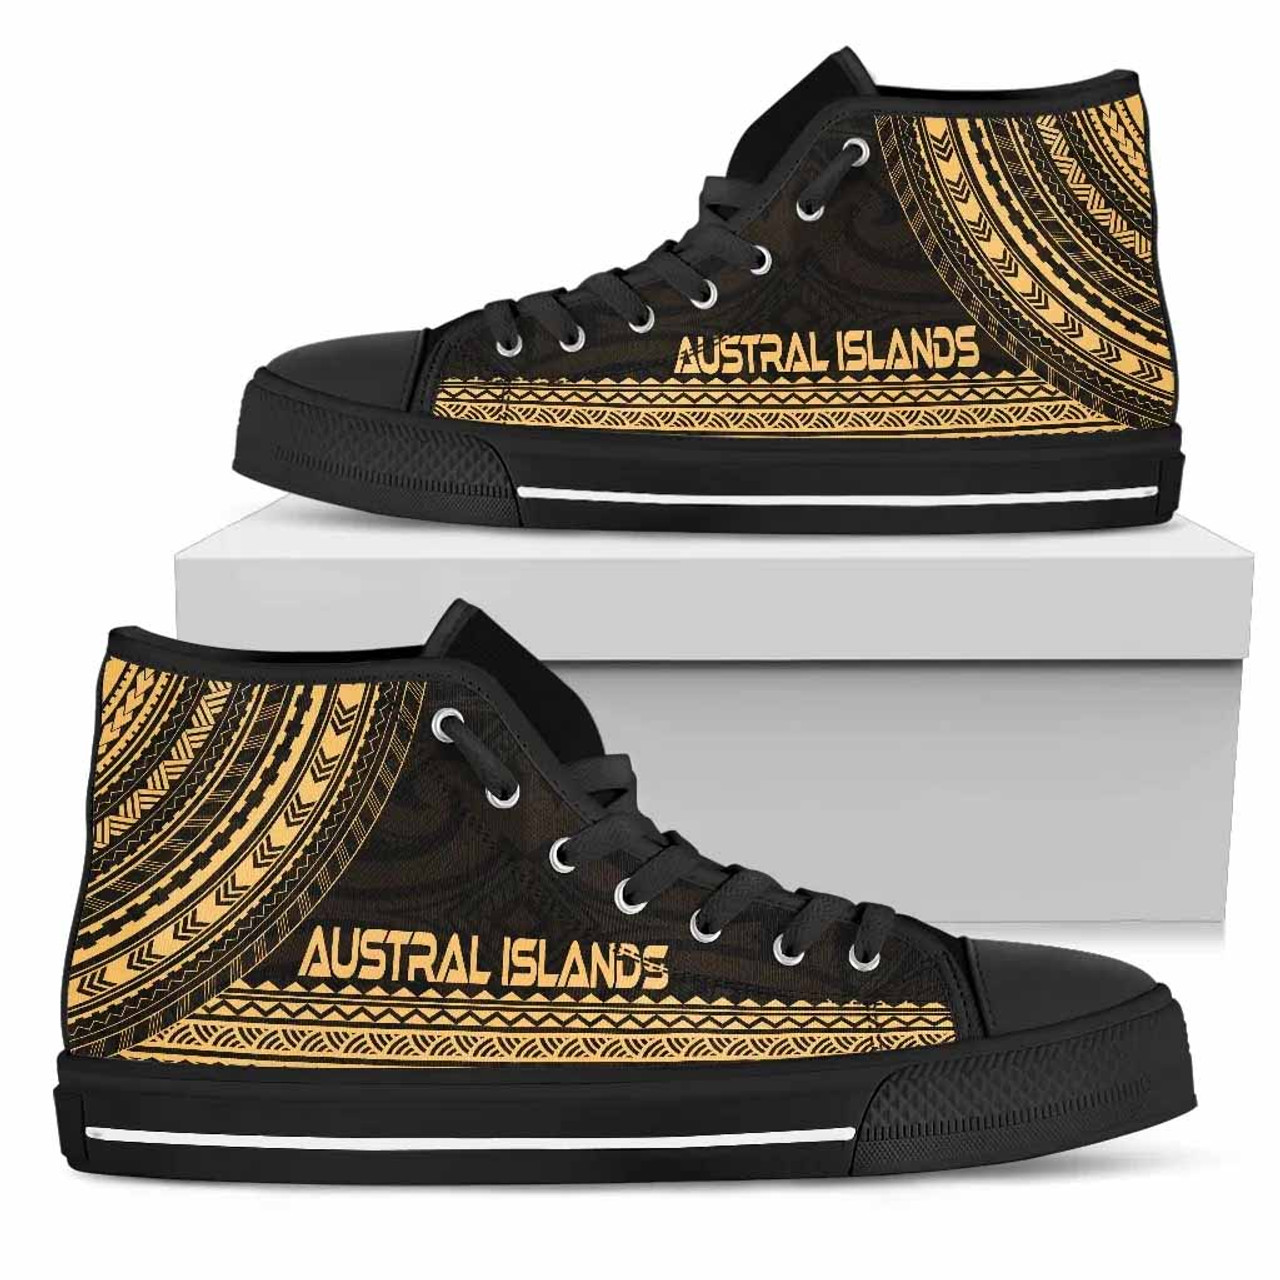 Austral Islands High Top Shoes - Polynesian Gold Chief Version 4